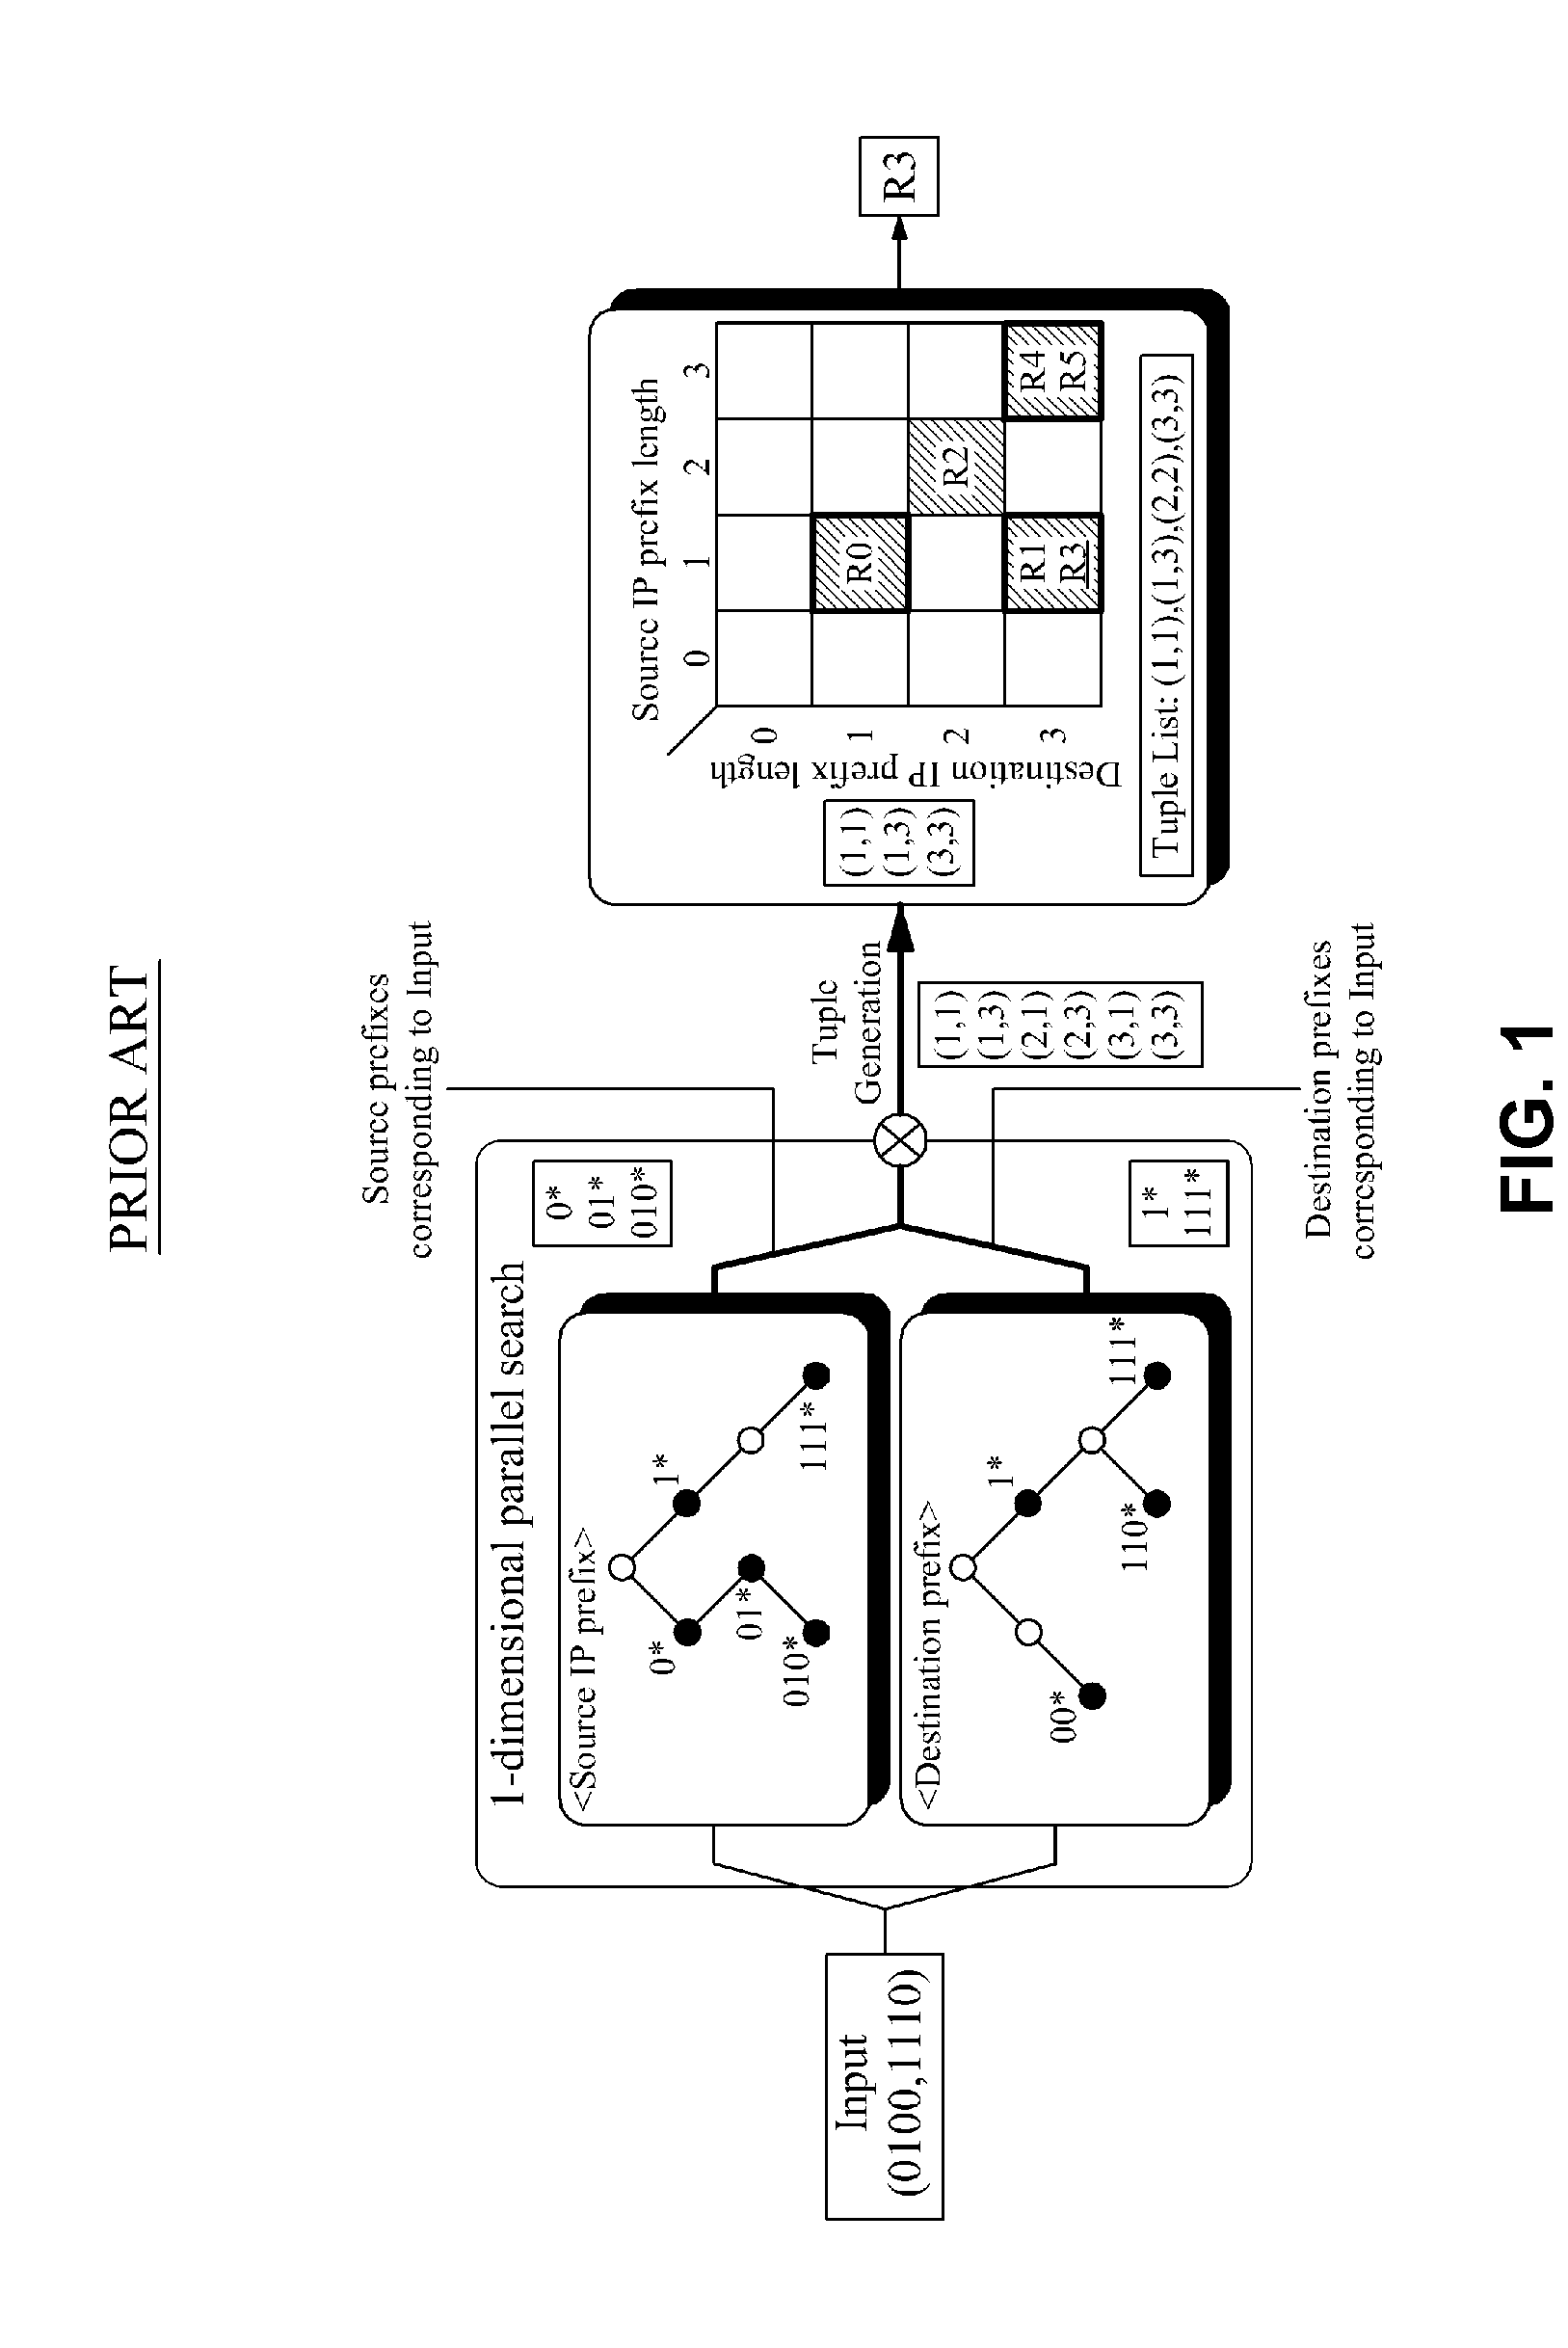 Method and apparatus for packet classification using bloom filter